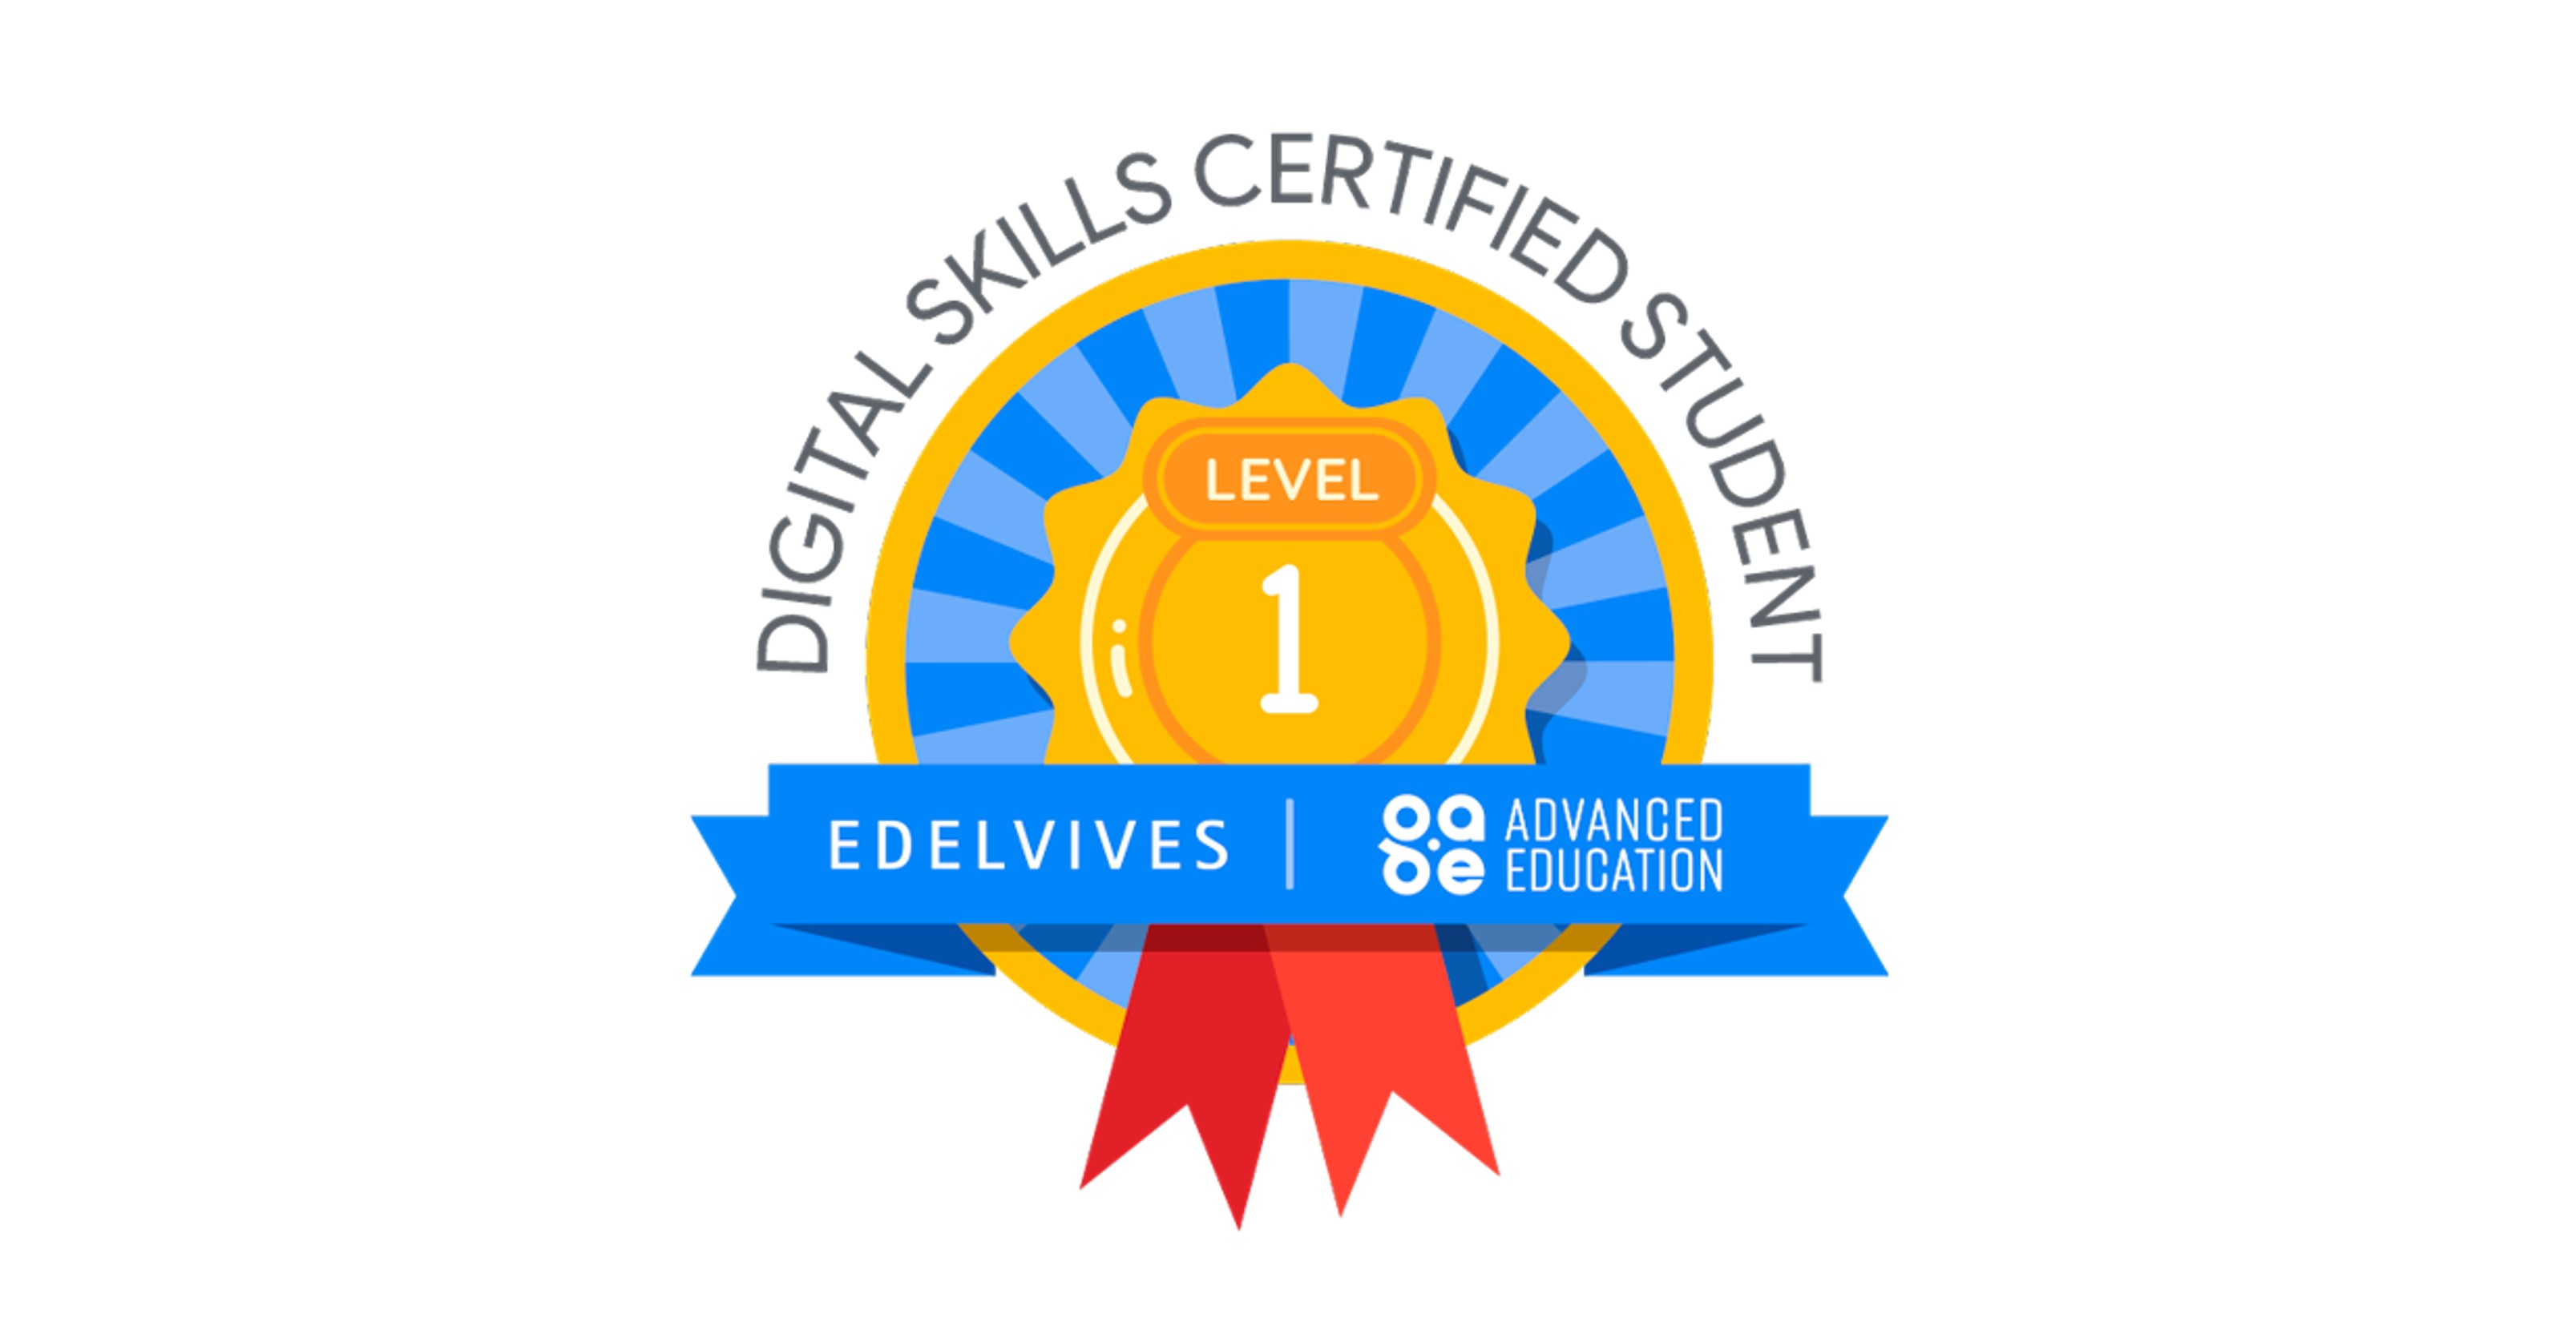 Google Certified Students Level 1